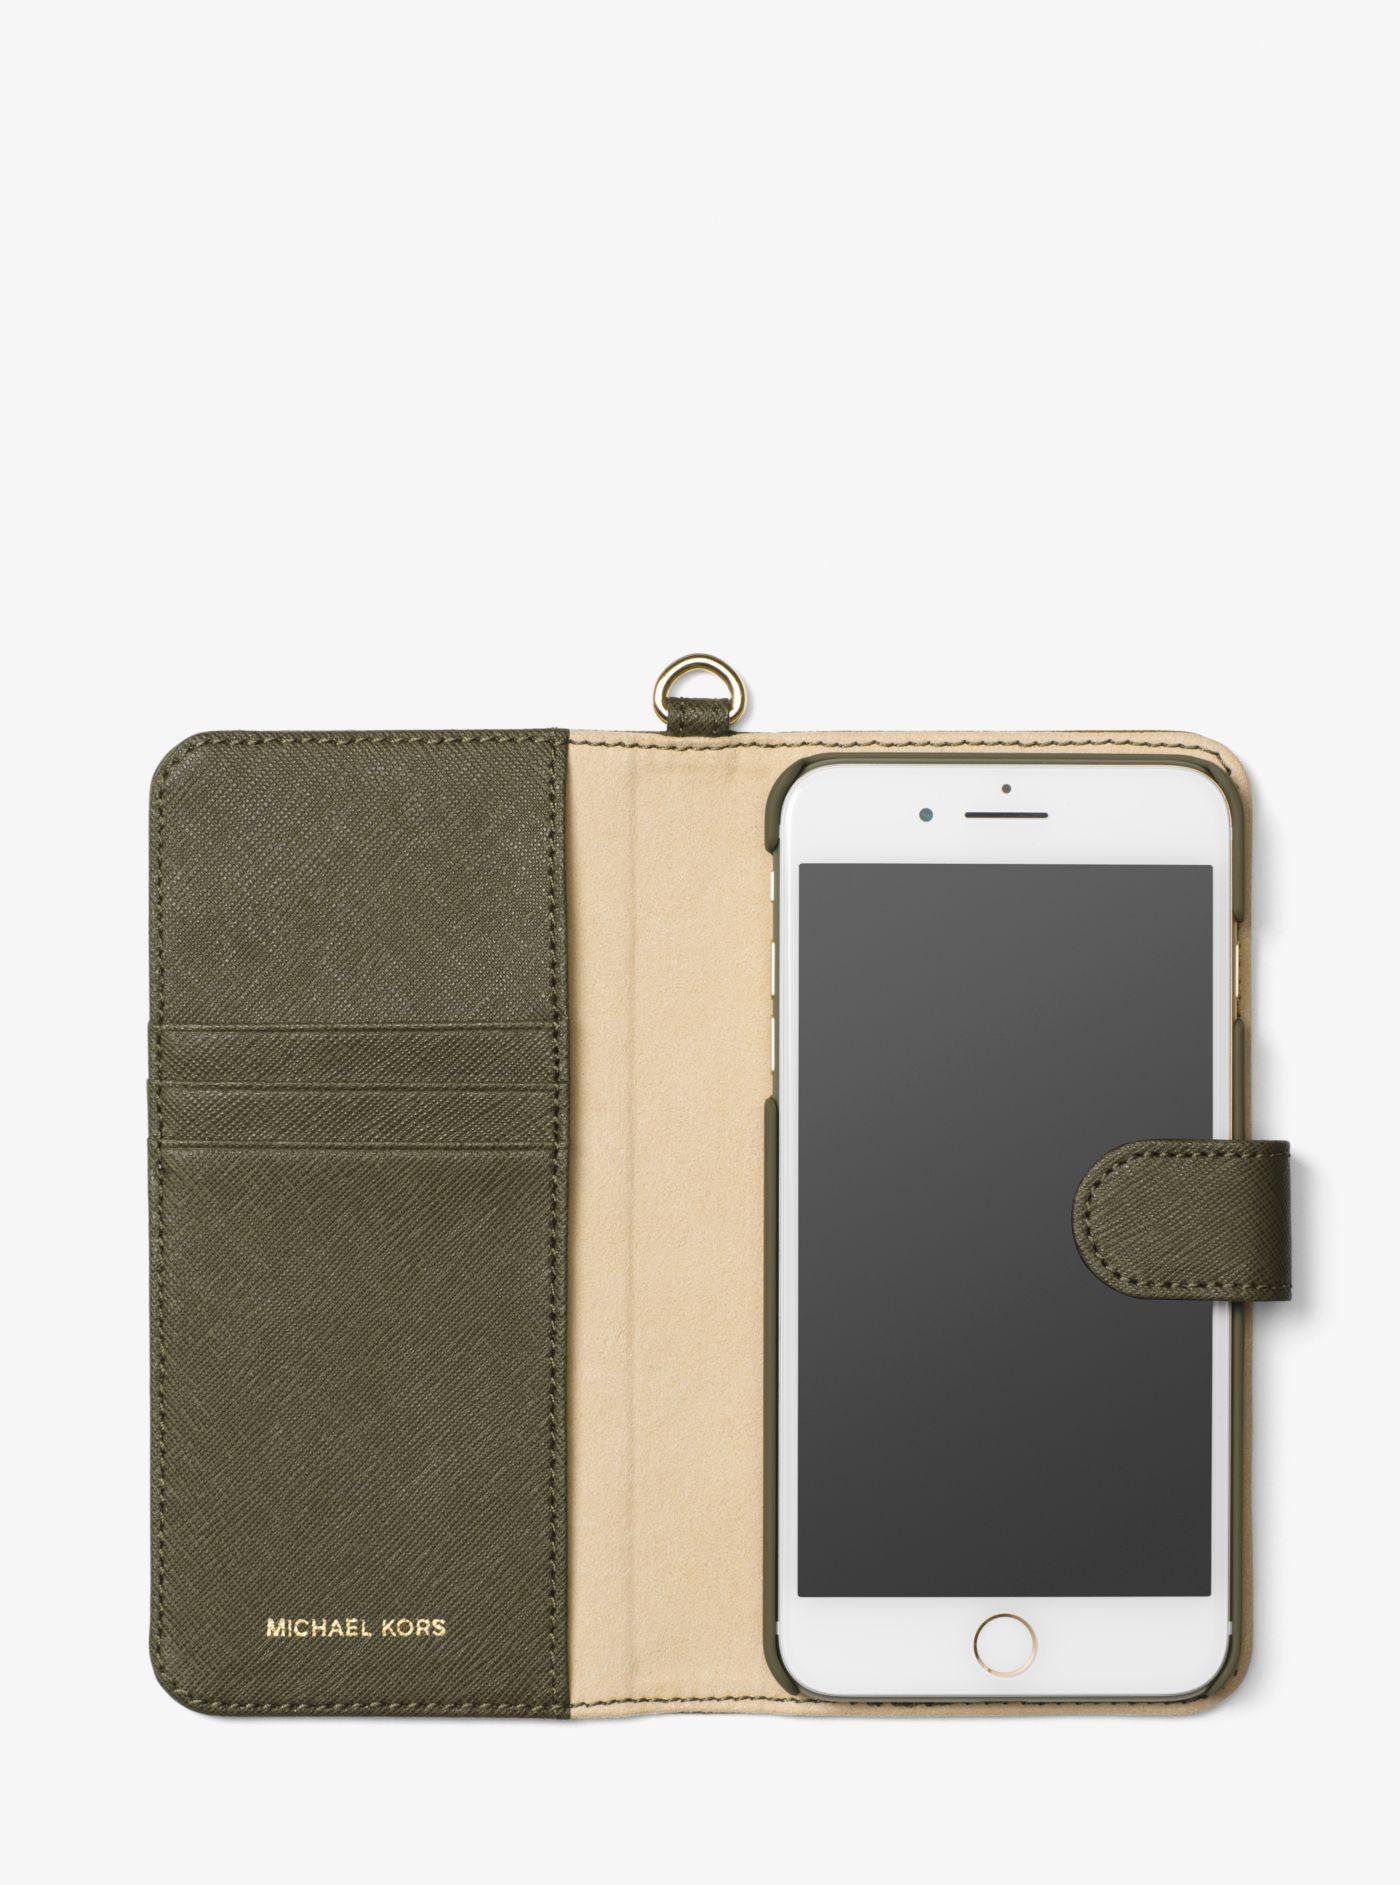 Michael Kors Saffiano Leather Folio Phone Case For Iphone 7 Plus in Olive  (Green) - Lyst